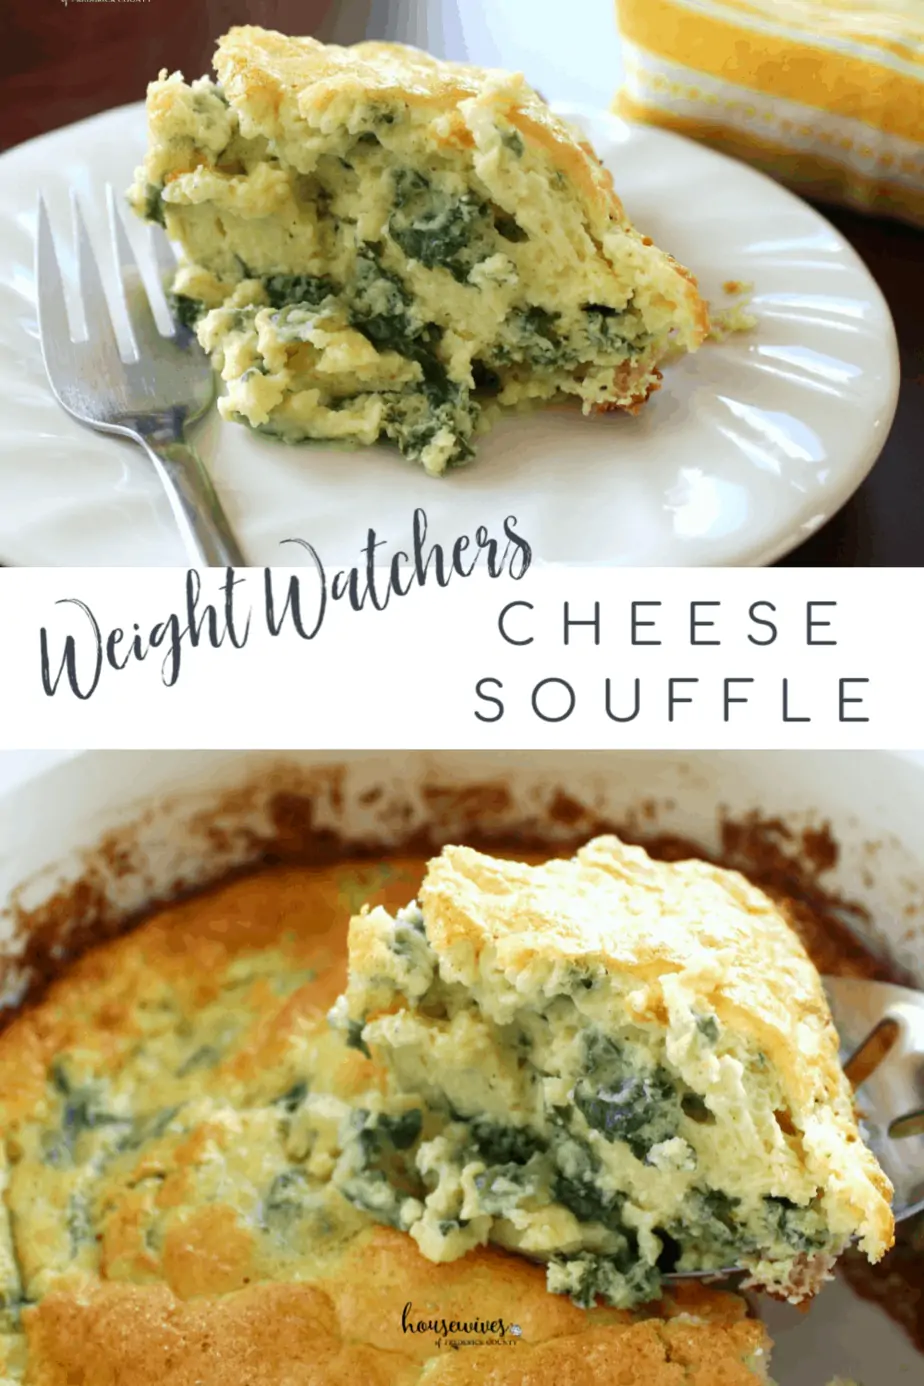 Weight Watchers Cheese Souffle with Kale - 4 SmartPoints